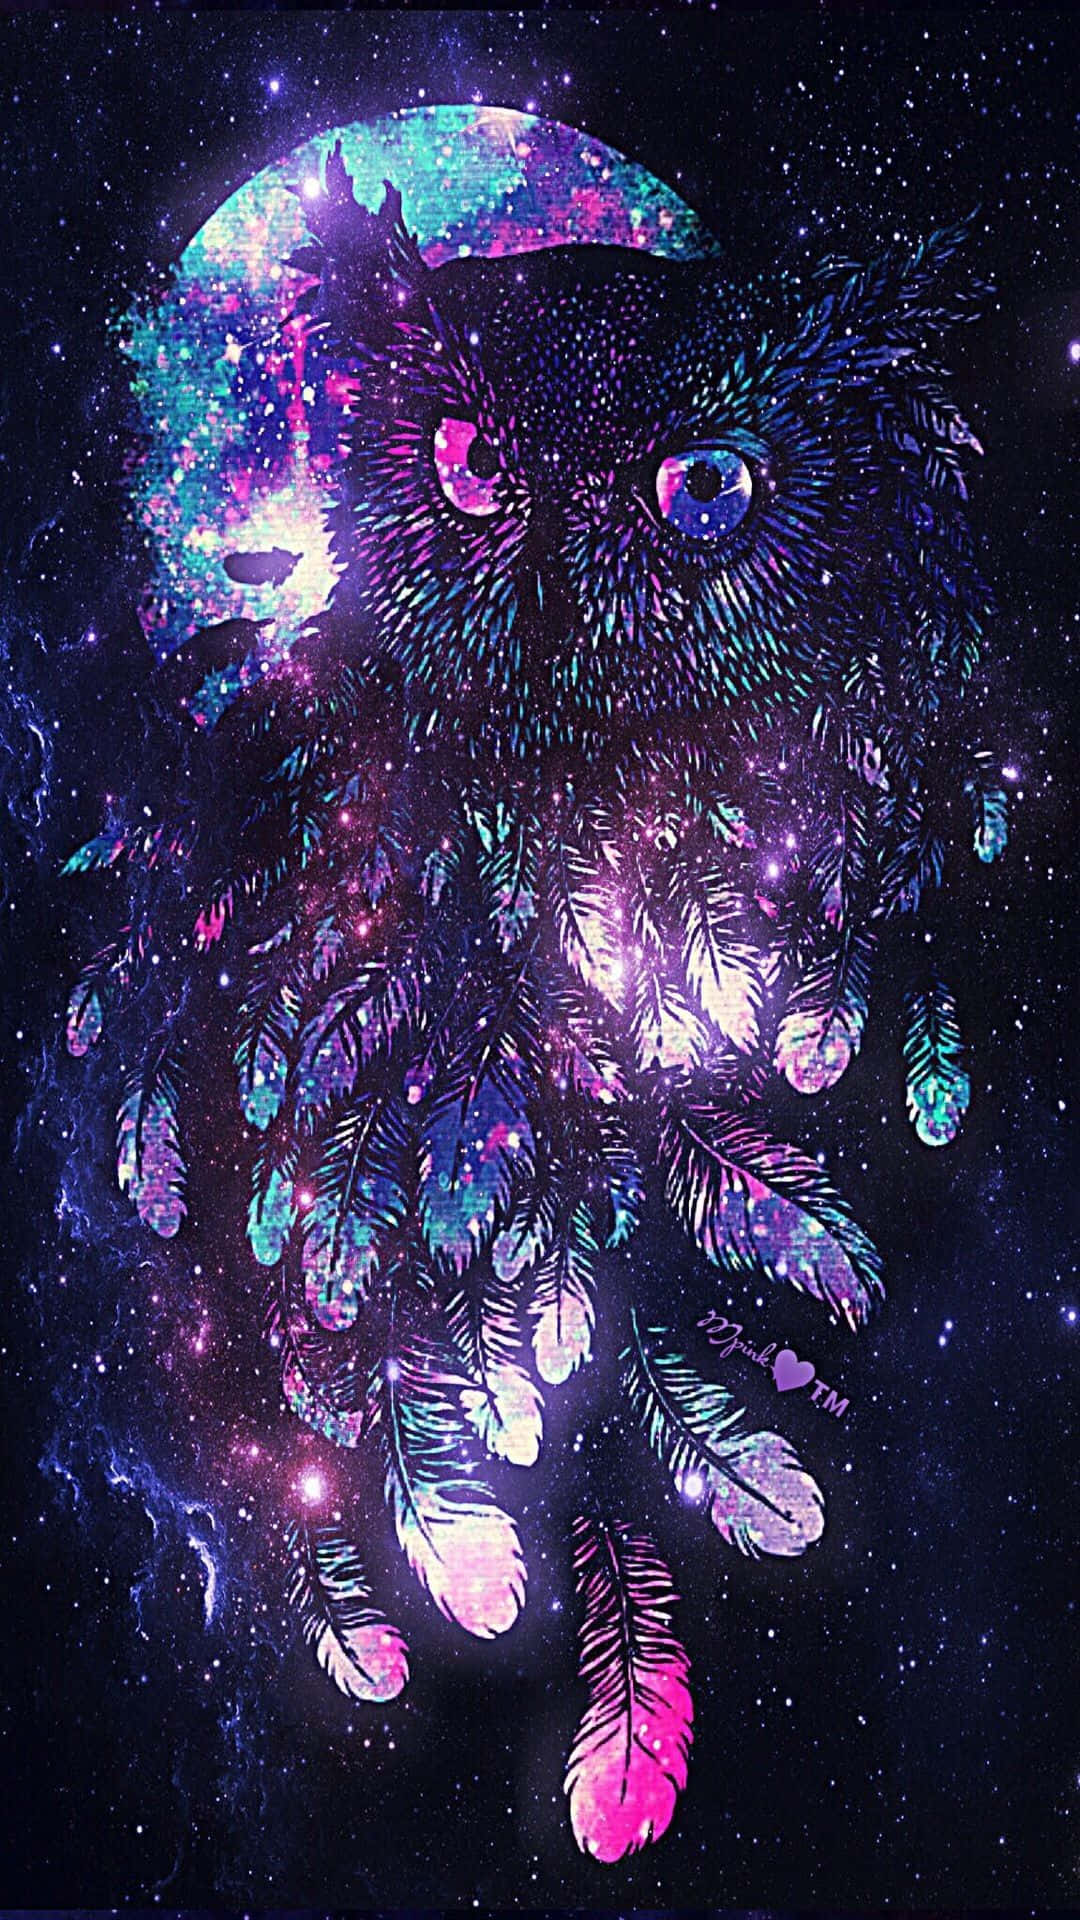 Explore the depths of space with Glitter Galaxy! Wallpaper